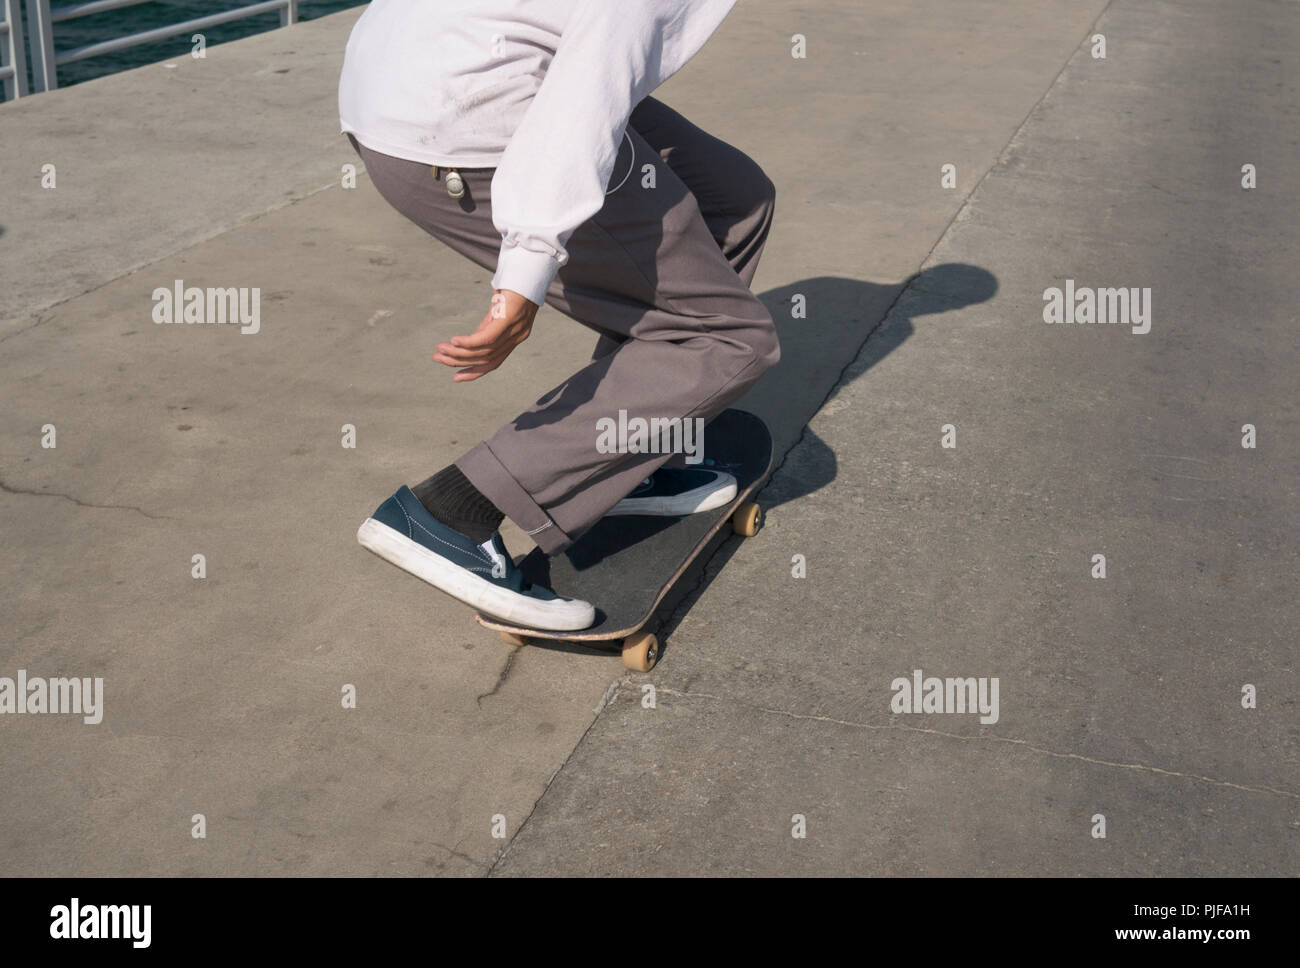 Young male skates low on a pier Stock Photo